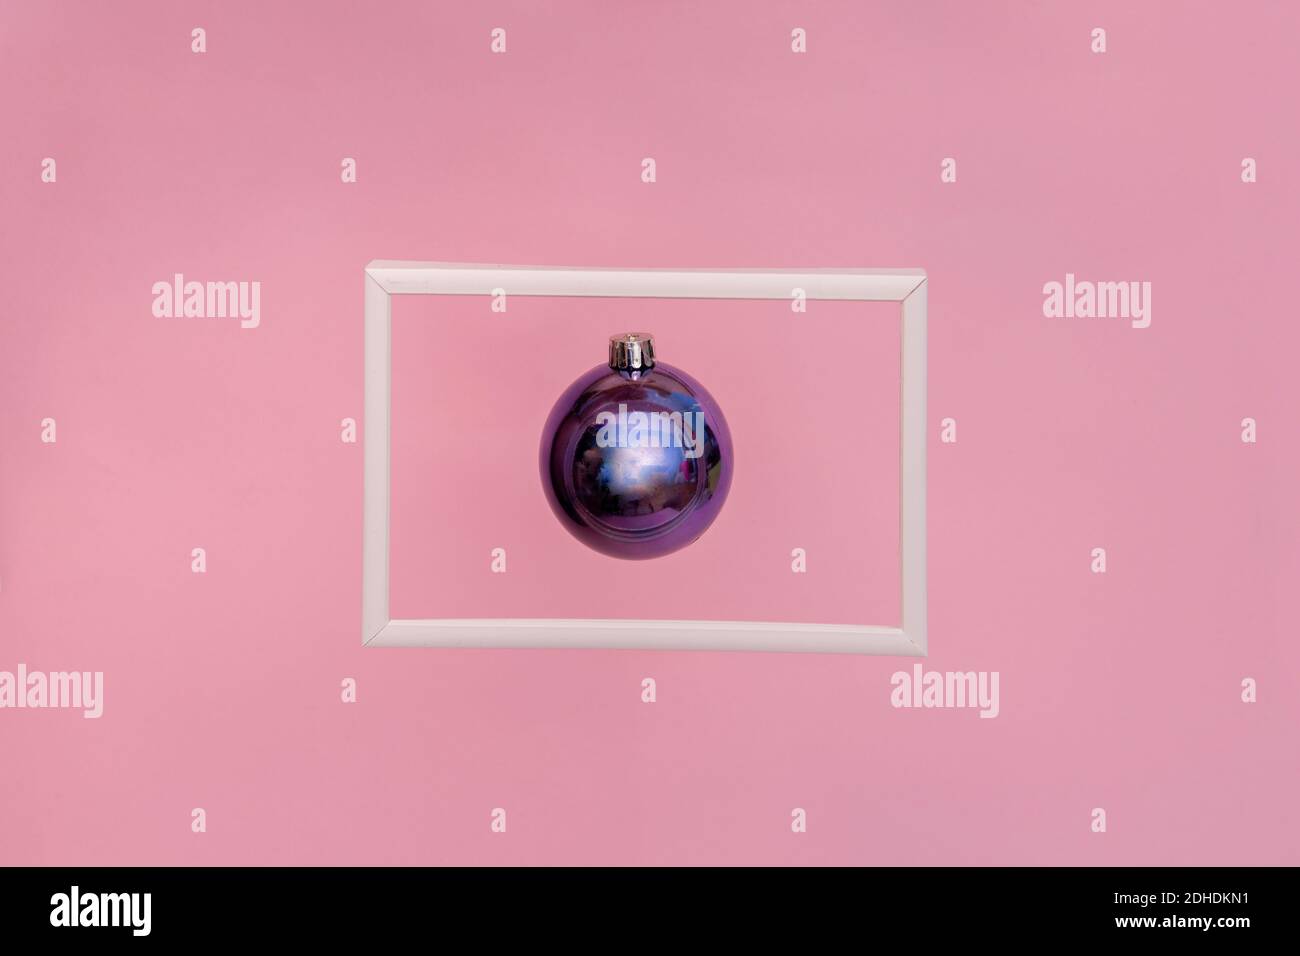 Christmas purple bauble floating in a picture frame. Abstract Christmas background Stock Photo